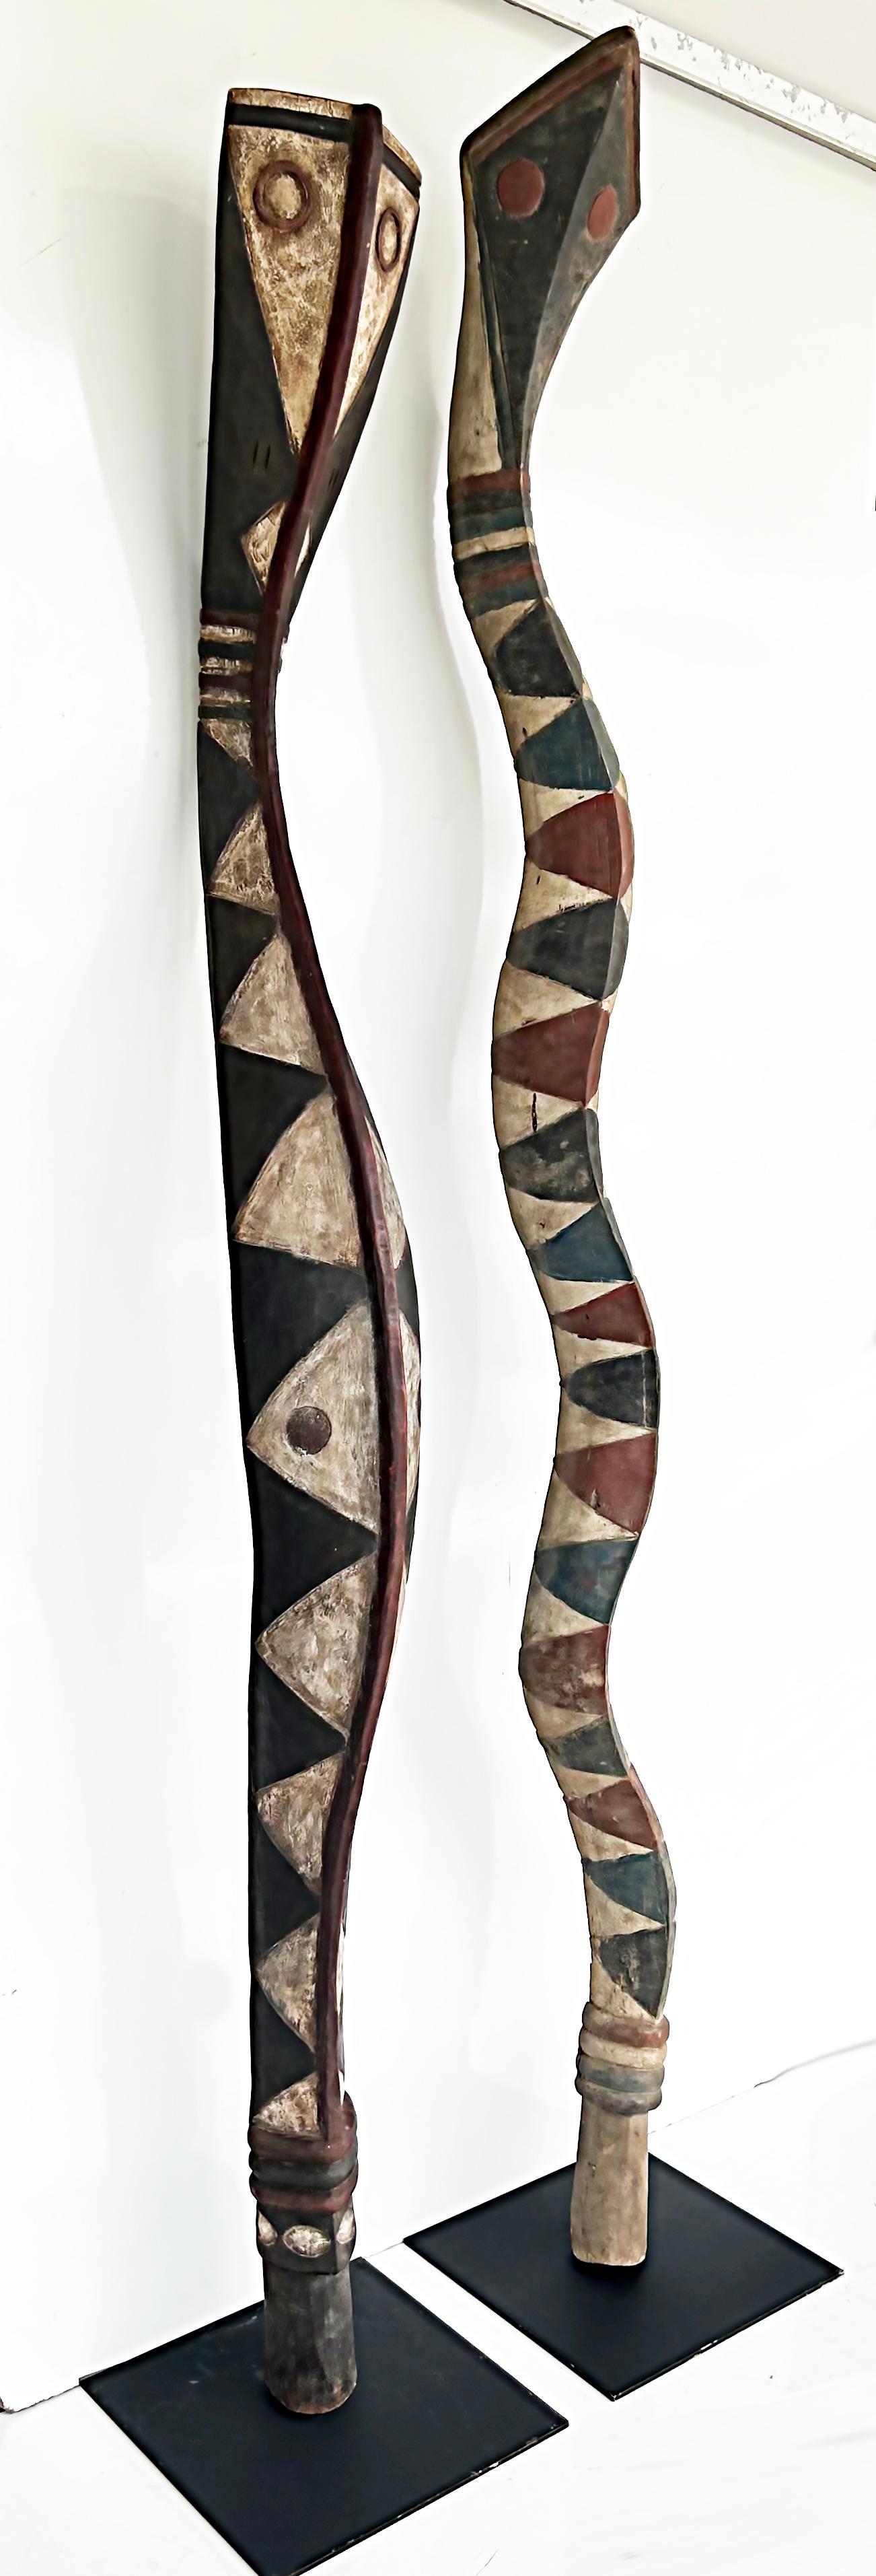 Western African, Guinea or Senegal Baga serpent sculptures on Custom Iron Stands

Offered for sale is a pair of outstanding Western African (Guinea) Baga society carved and painted wood serpent sculptures which symbolize protection. These